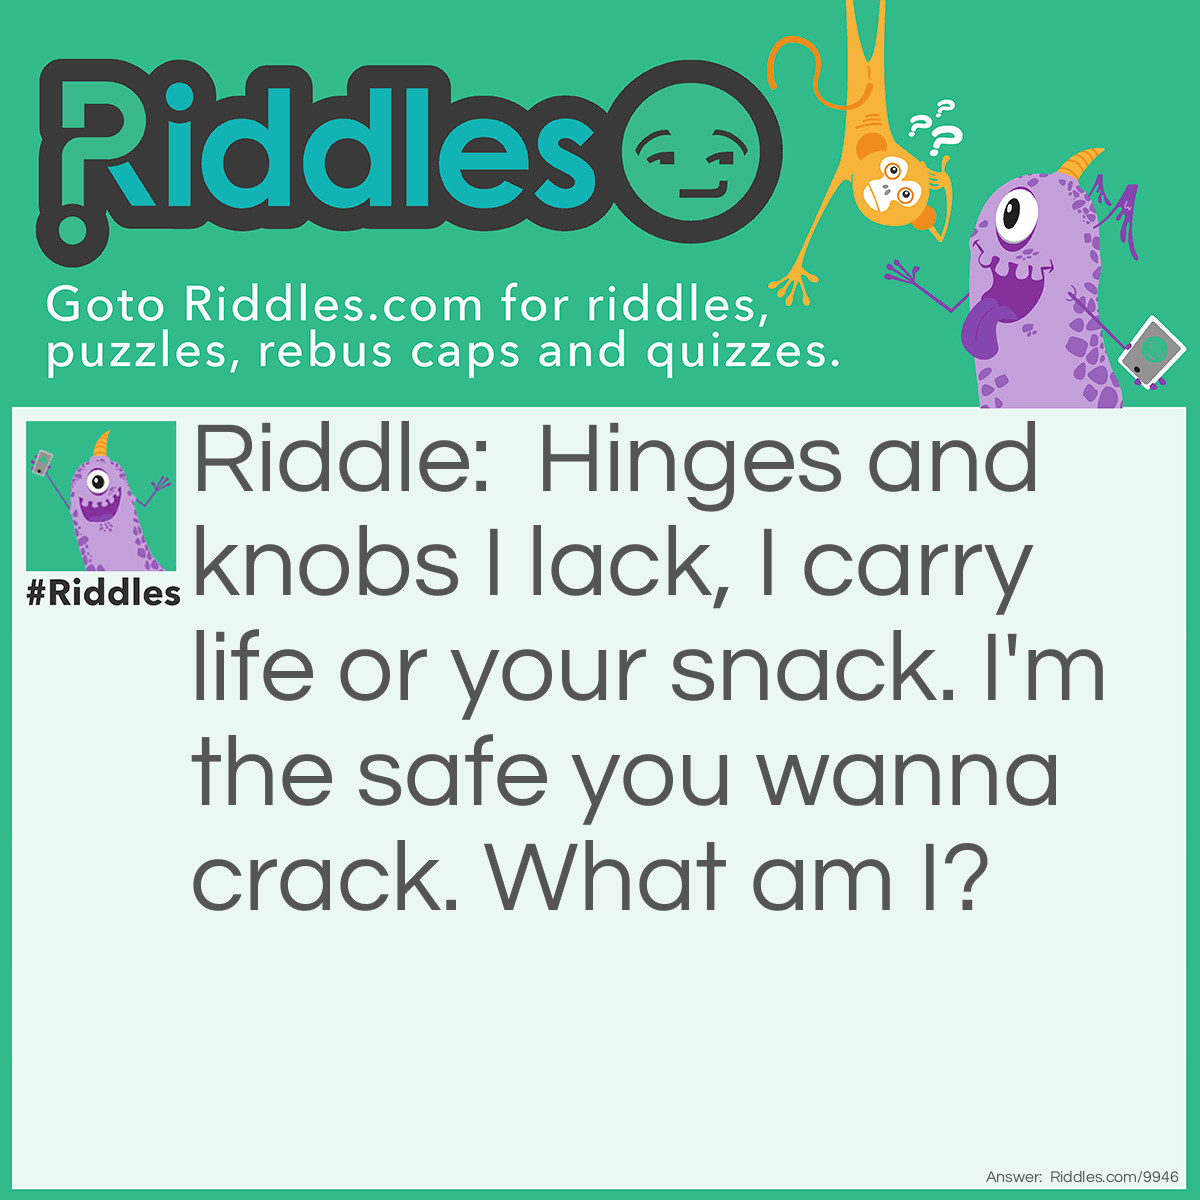 Riddle: Hinges and knobs I lack, I carry life or your snack. I'm the safe you wanna crack. What am I? Answer: An Egg.